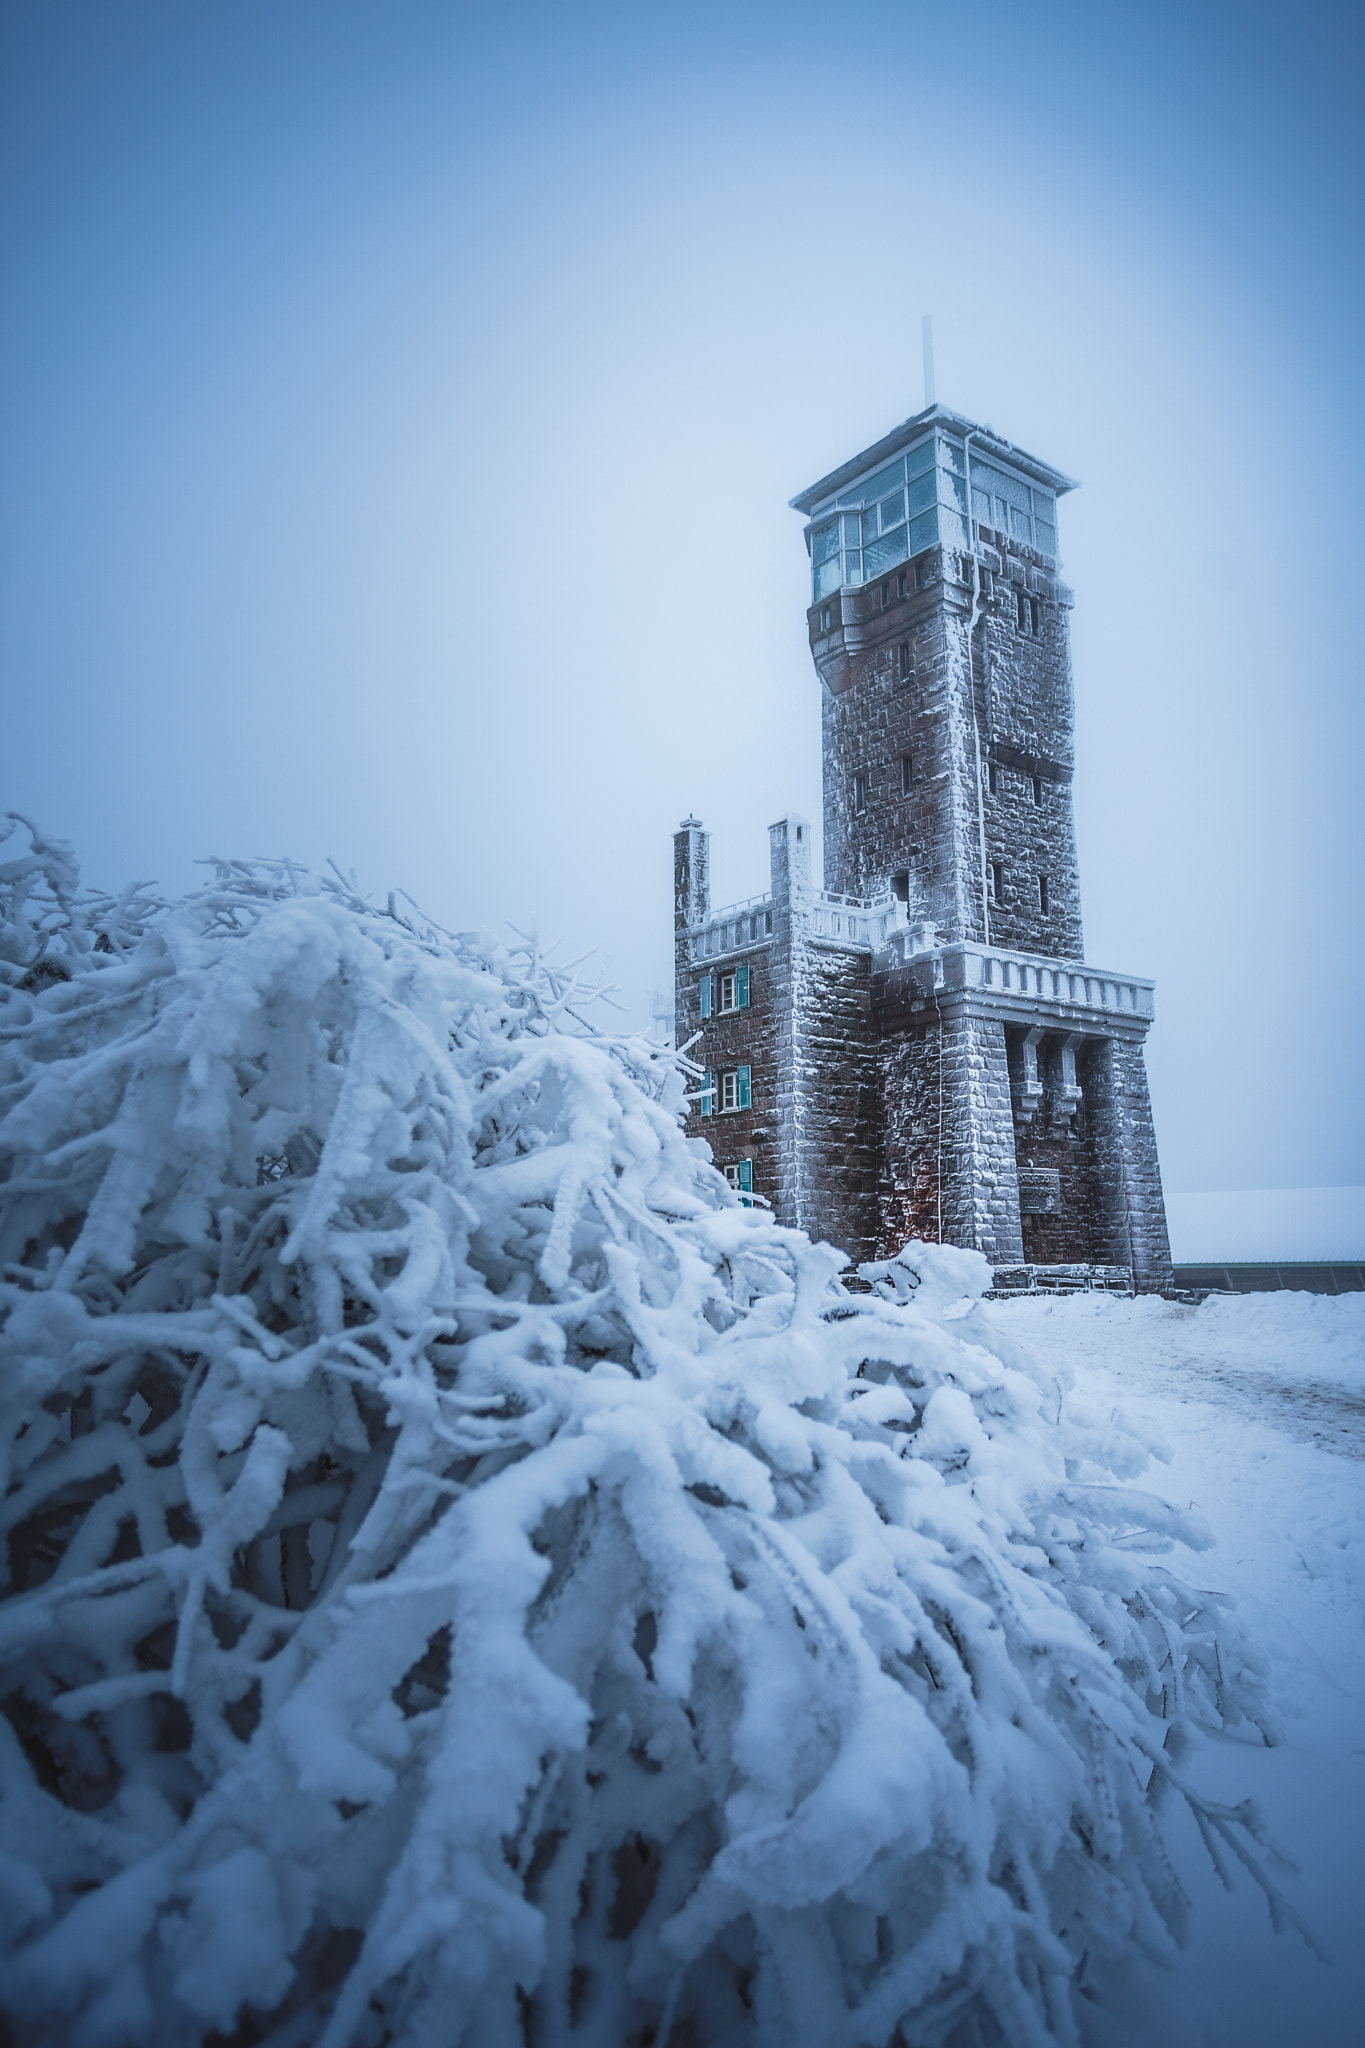 Sony a7 II sample photo. Iced up observation tower photography